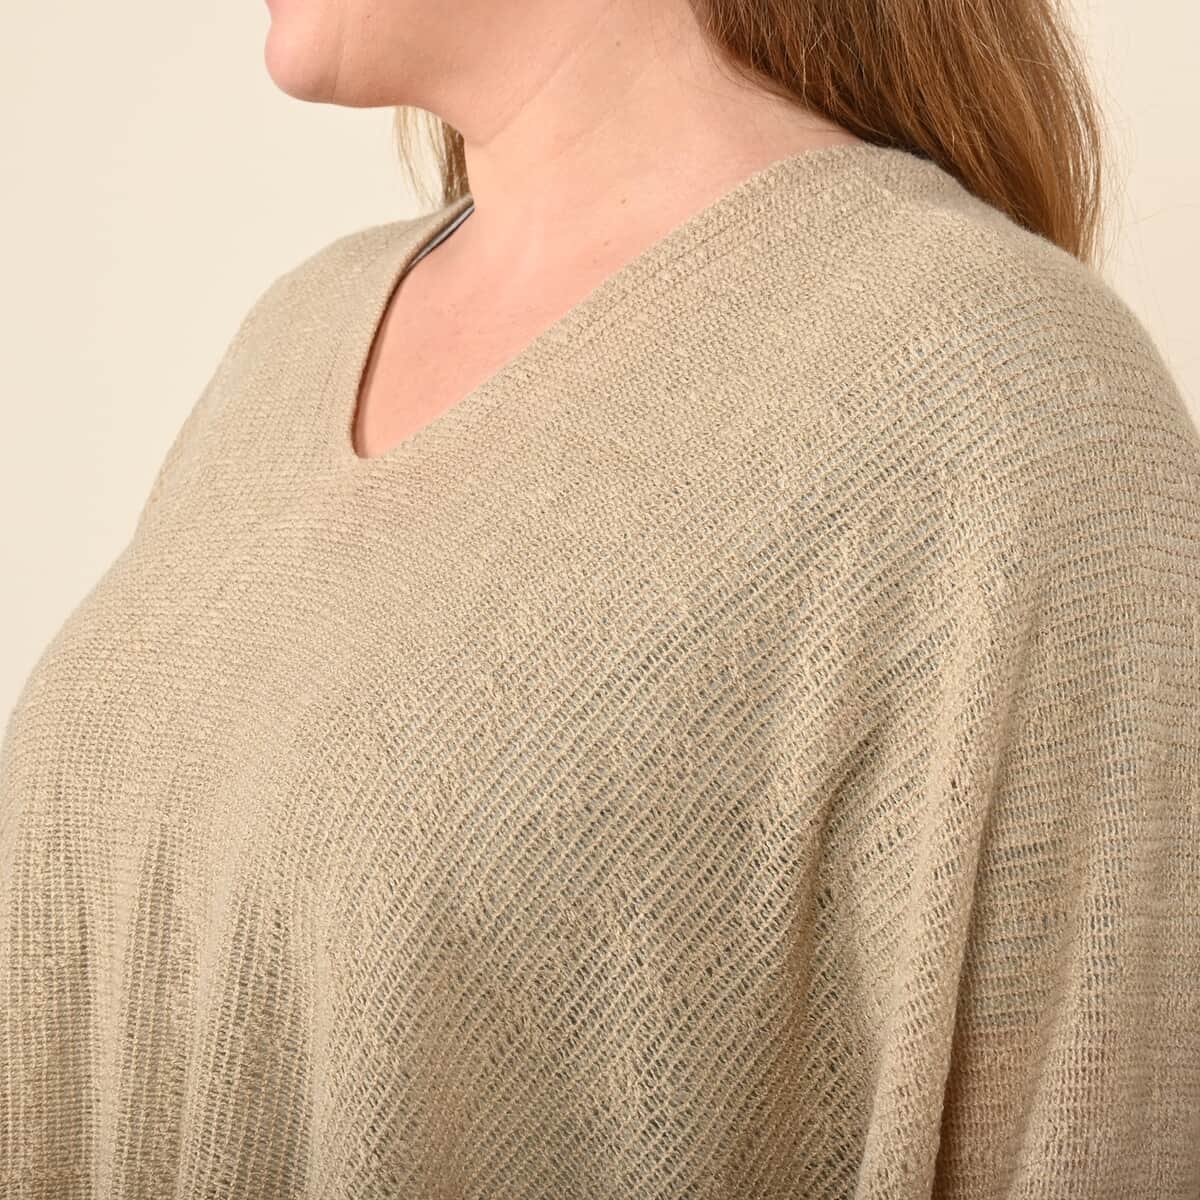 TAMSY Beige Solid Knitted Poncho (One Size Fits Most, 21.6"x38.5") image number 3